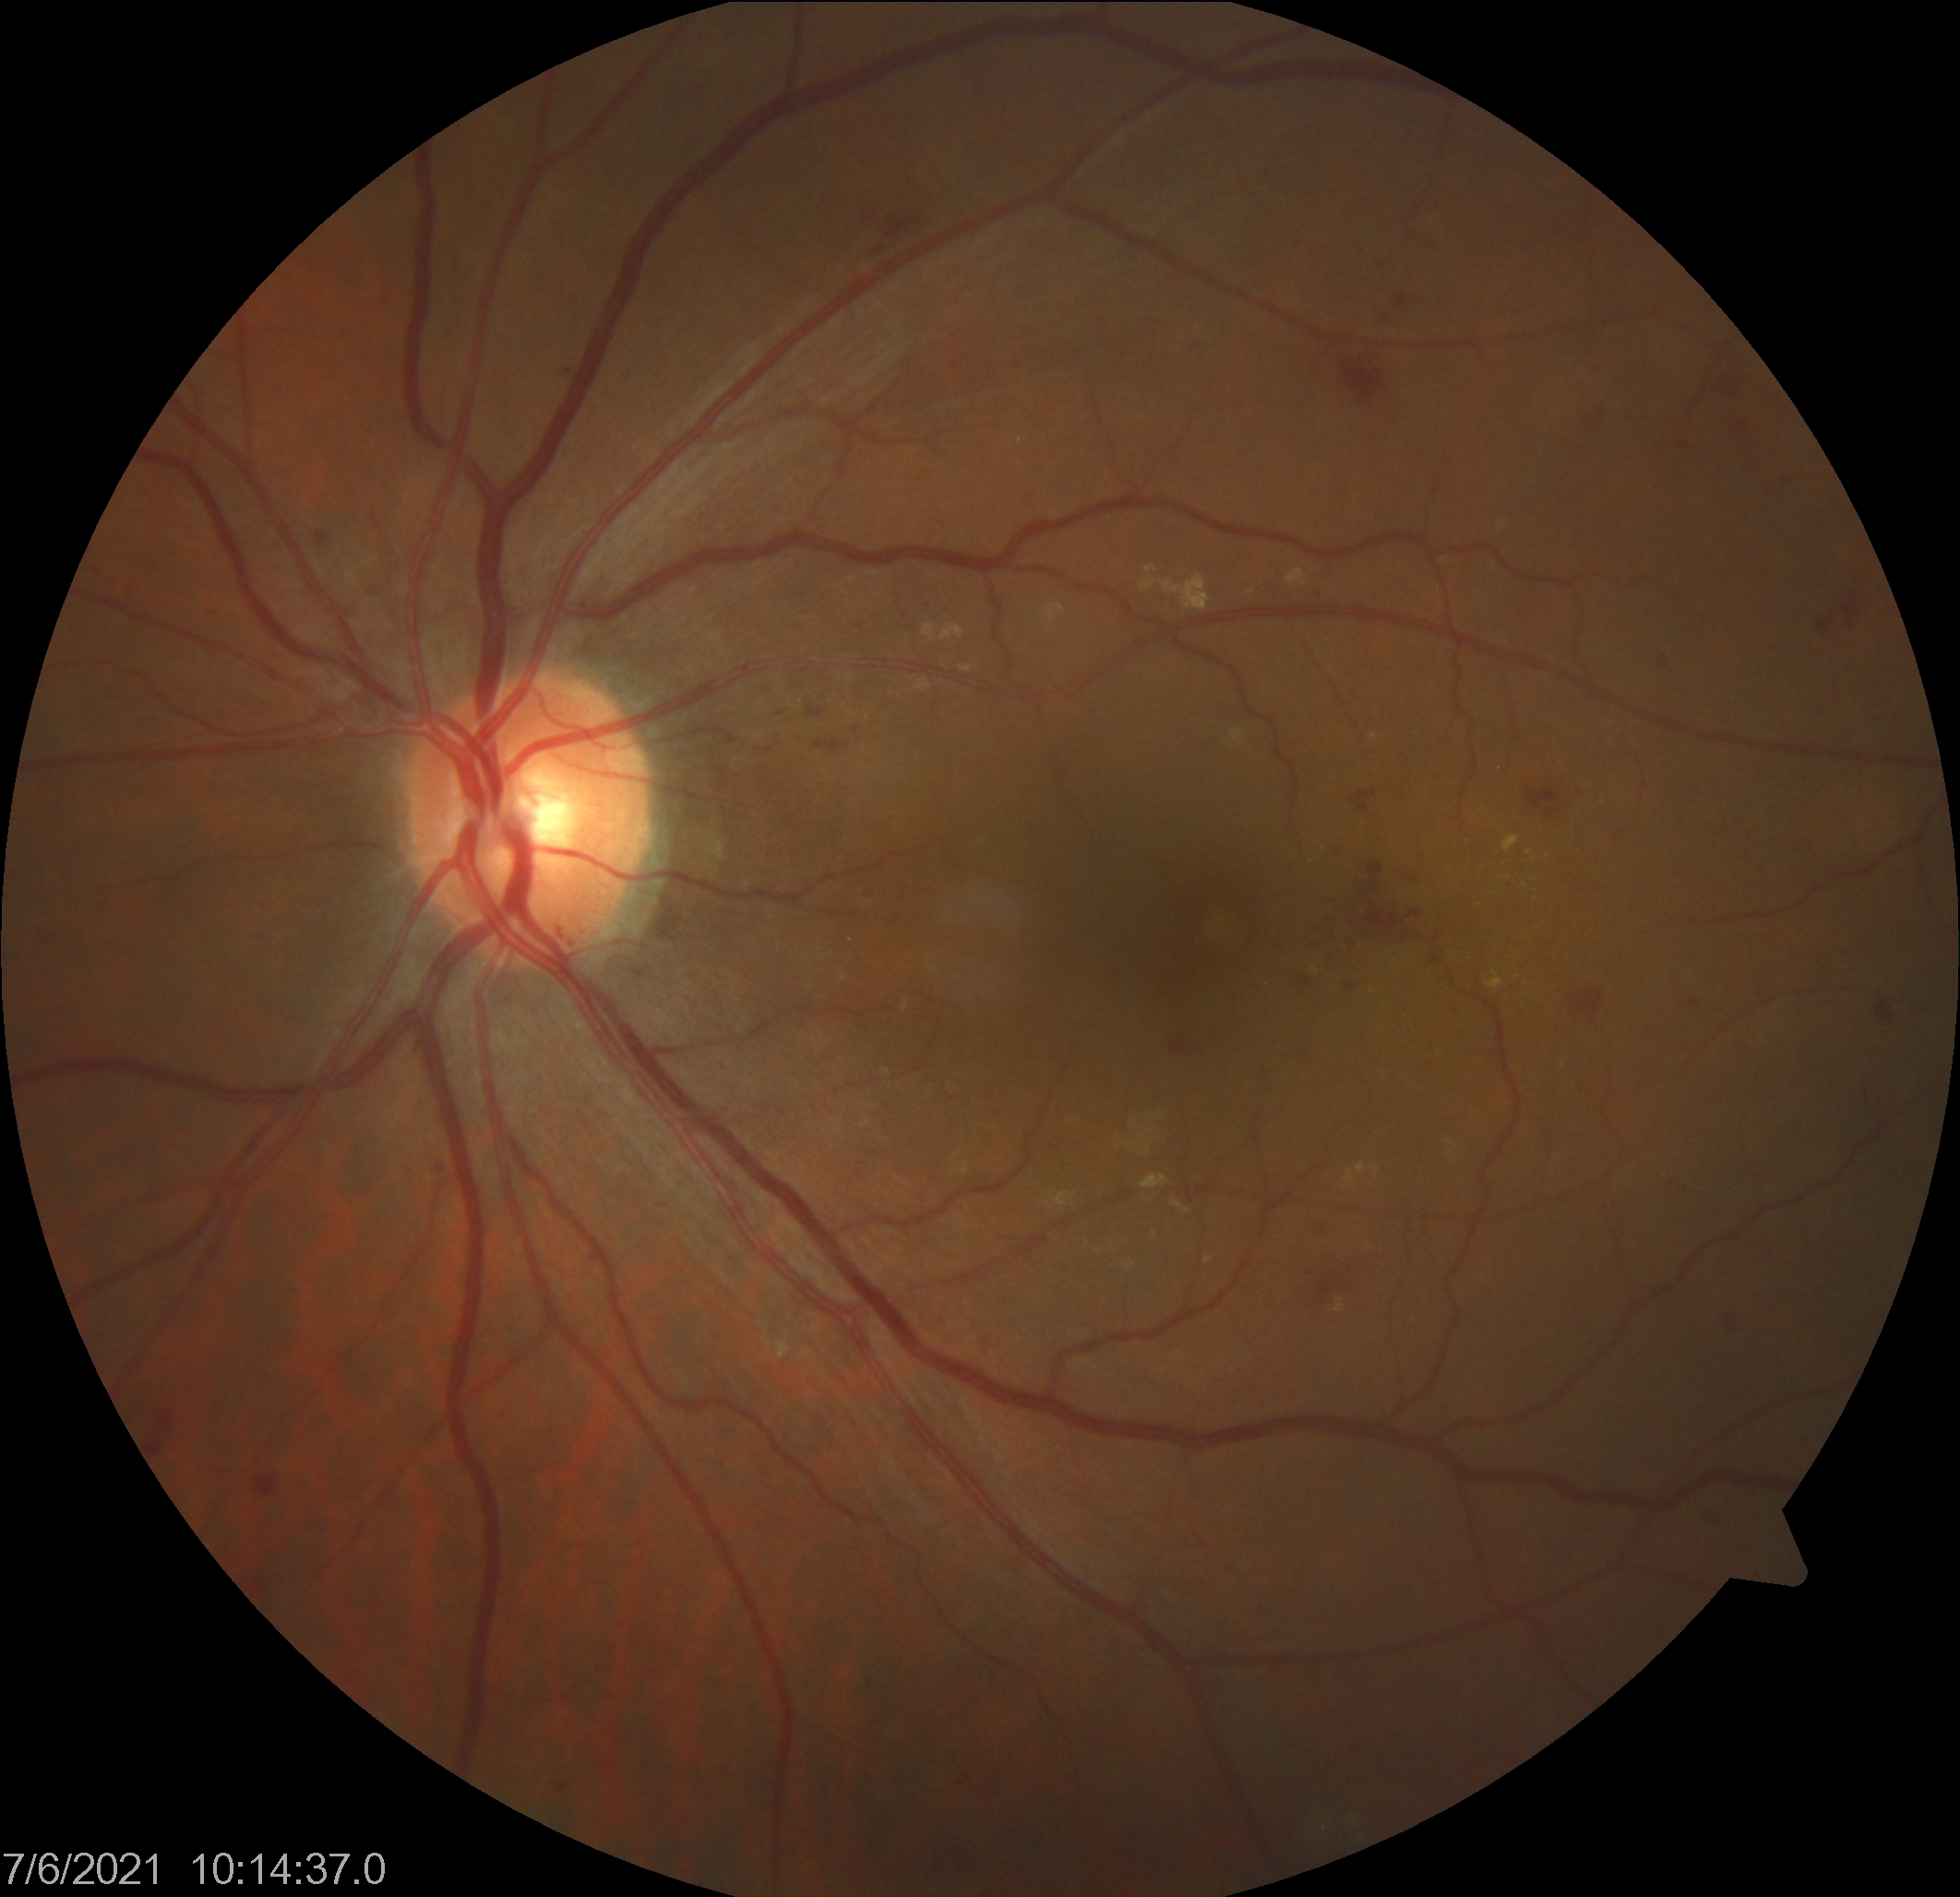 Left eye fundus photo showing diabetic macular edema (DME) and non proliferative diabetic retinopathy (non PDR).
Hard exudates can be visualized in the macula and hemorrhages in the four quadrants of the retina.